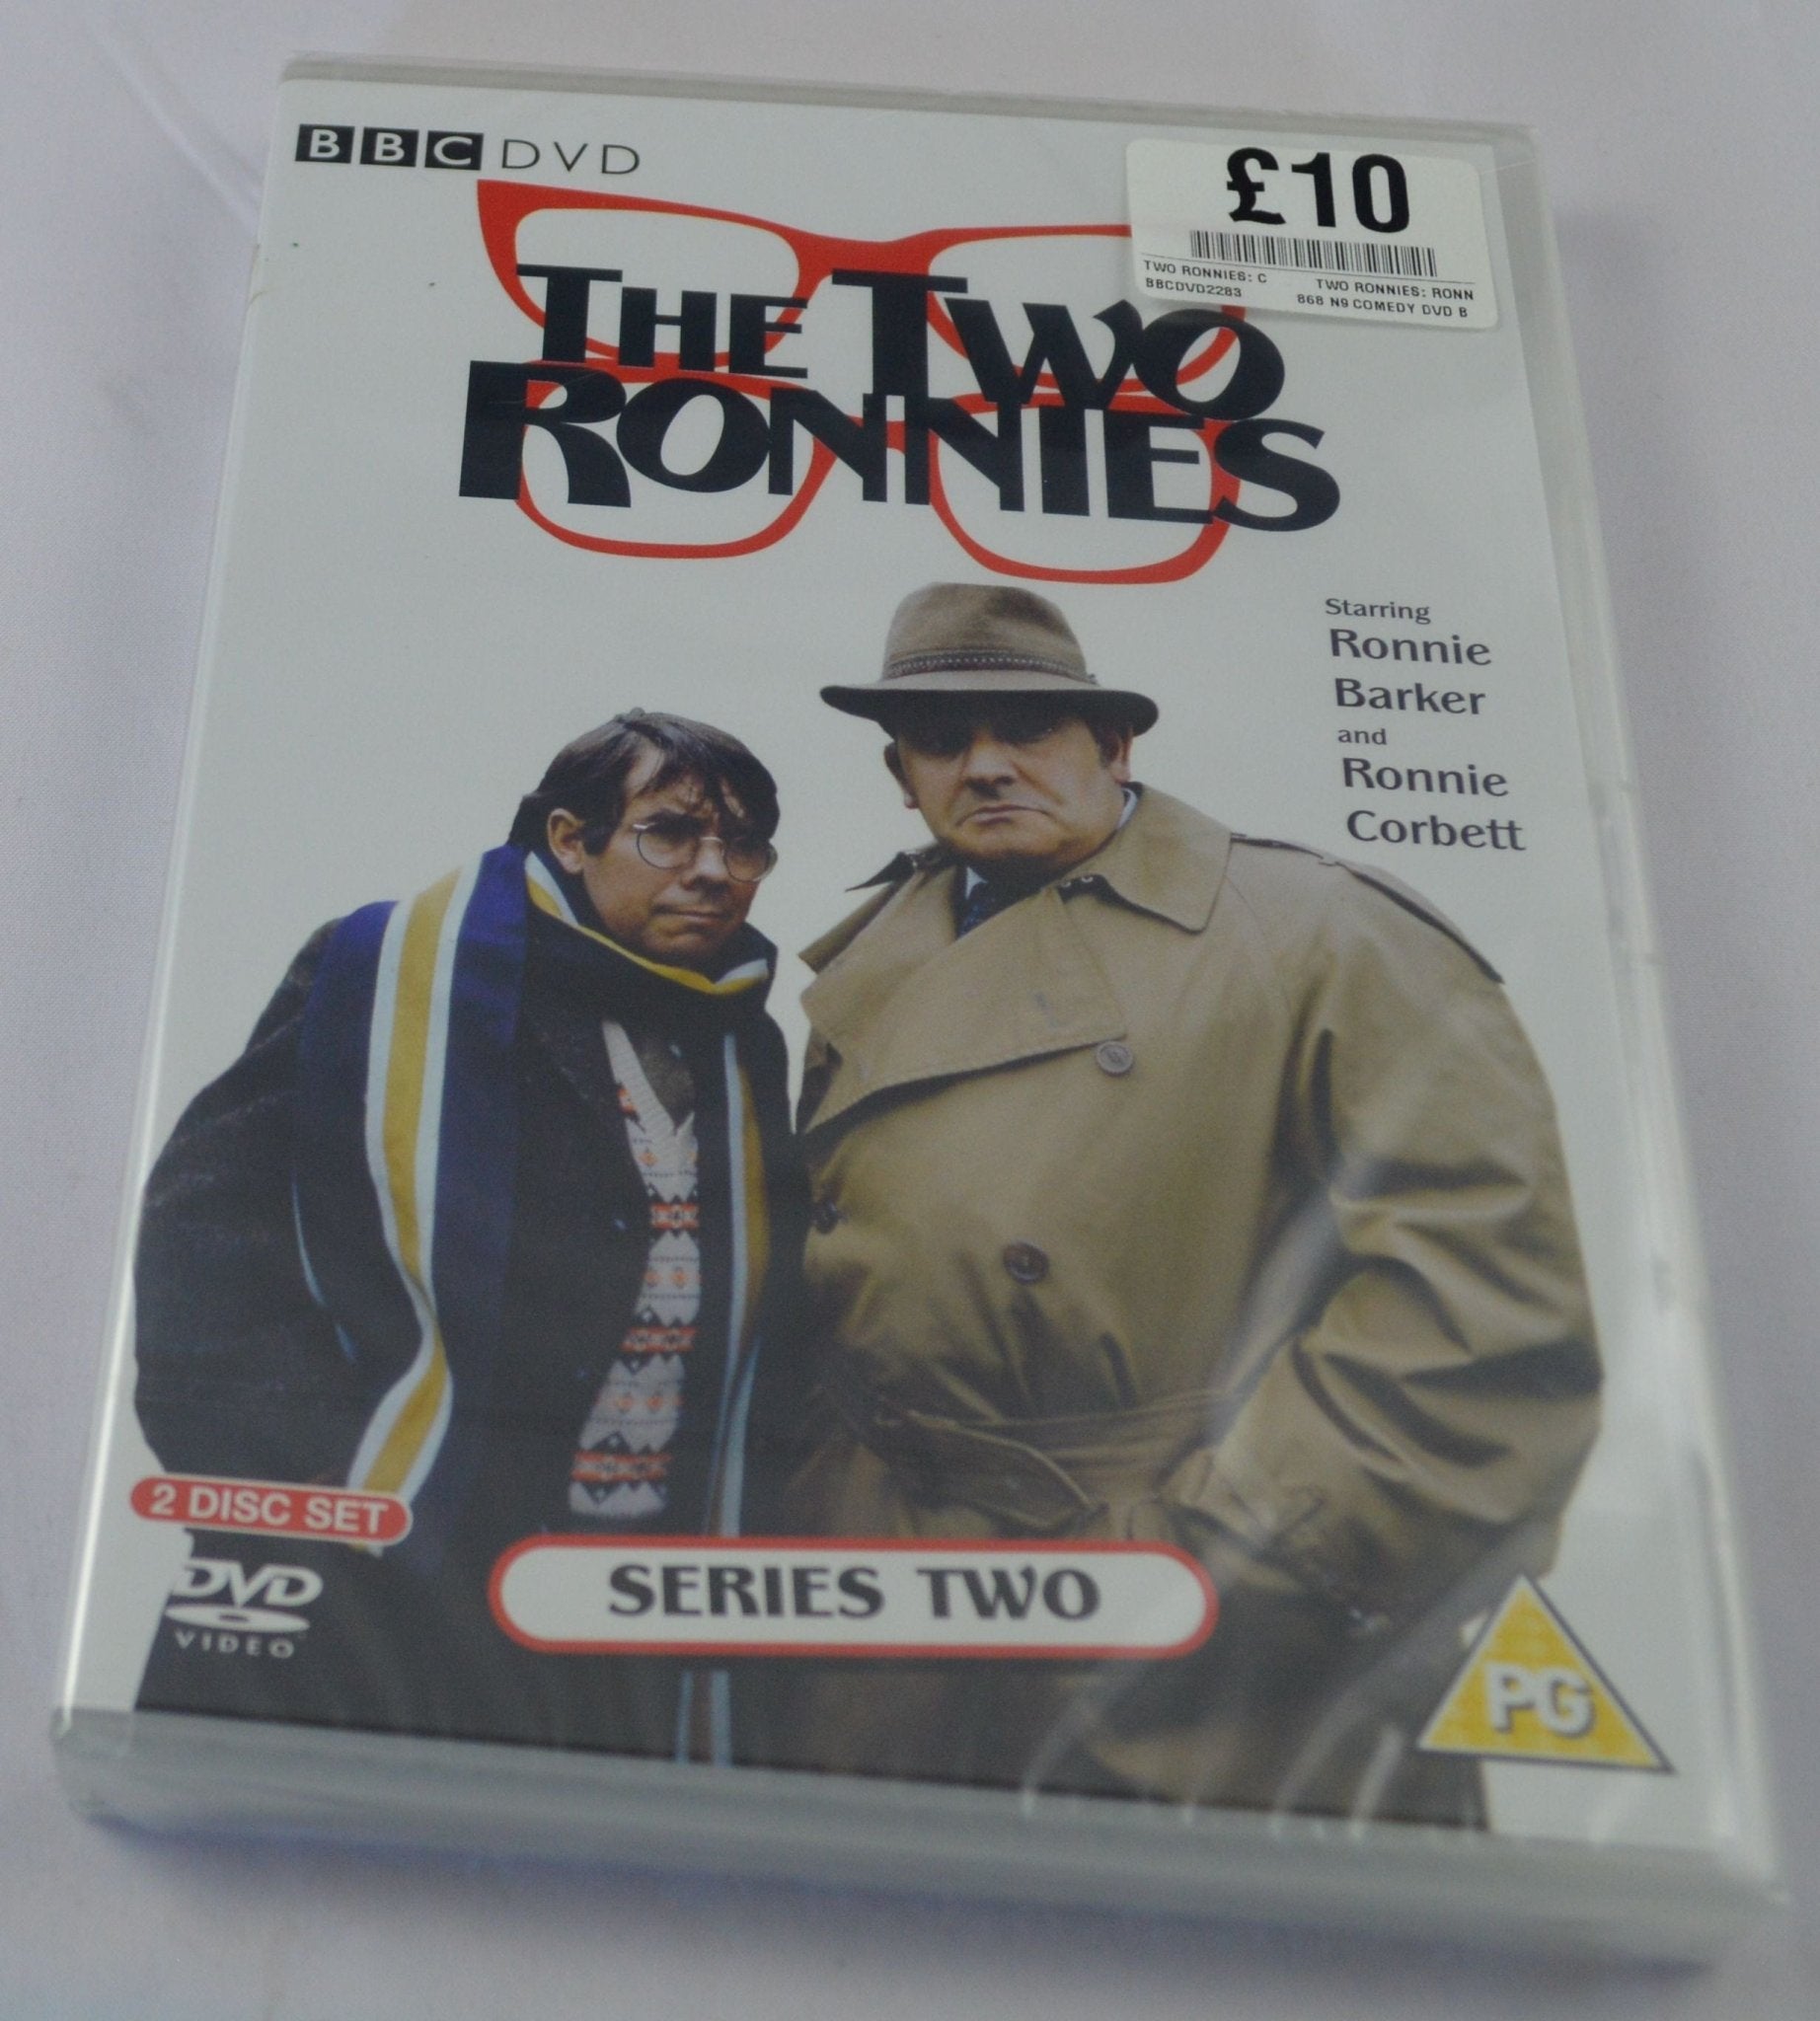 TWO SEALED DVD'S THE BEST OF THE TWO RONNIES & TWO RONNIES SERIES 2(PREVIOUSLY OWNED)GOOD CONDITION - TMD167207